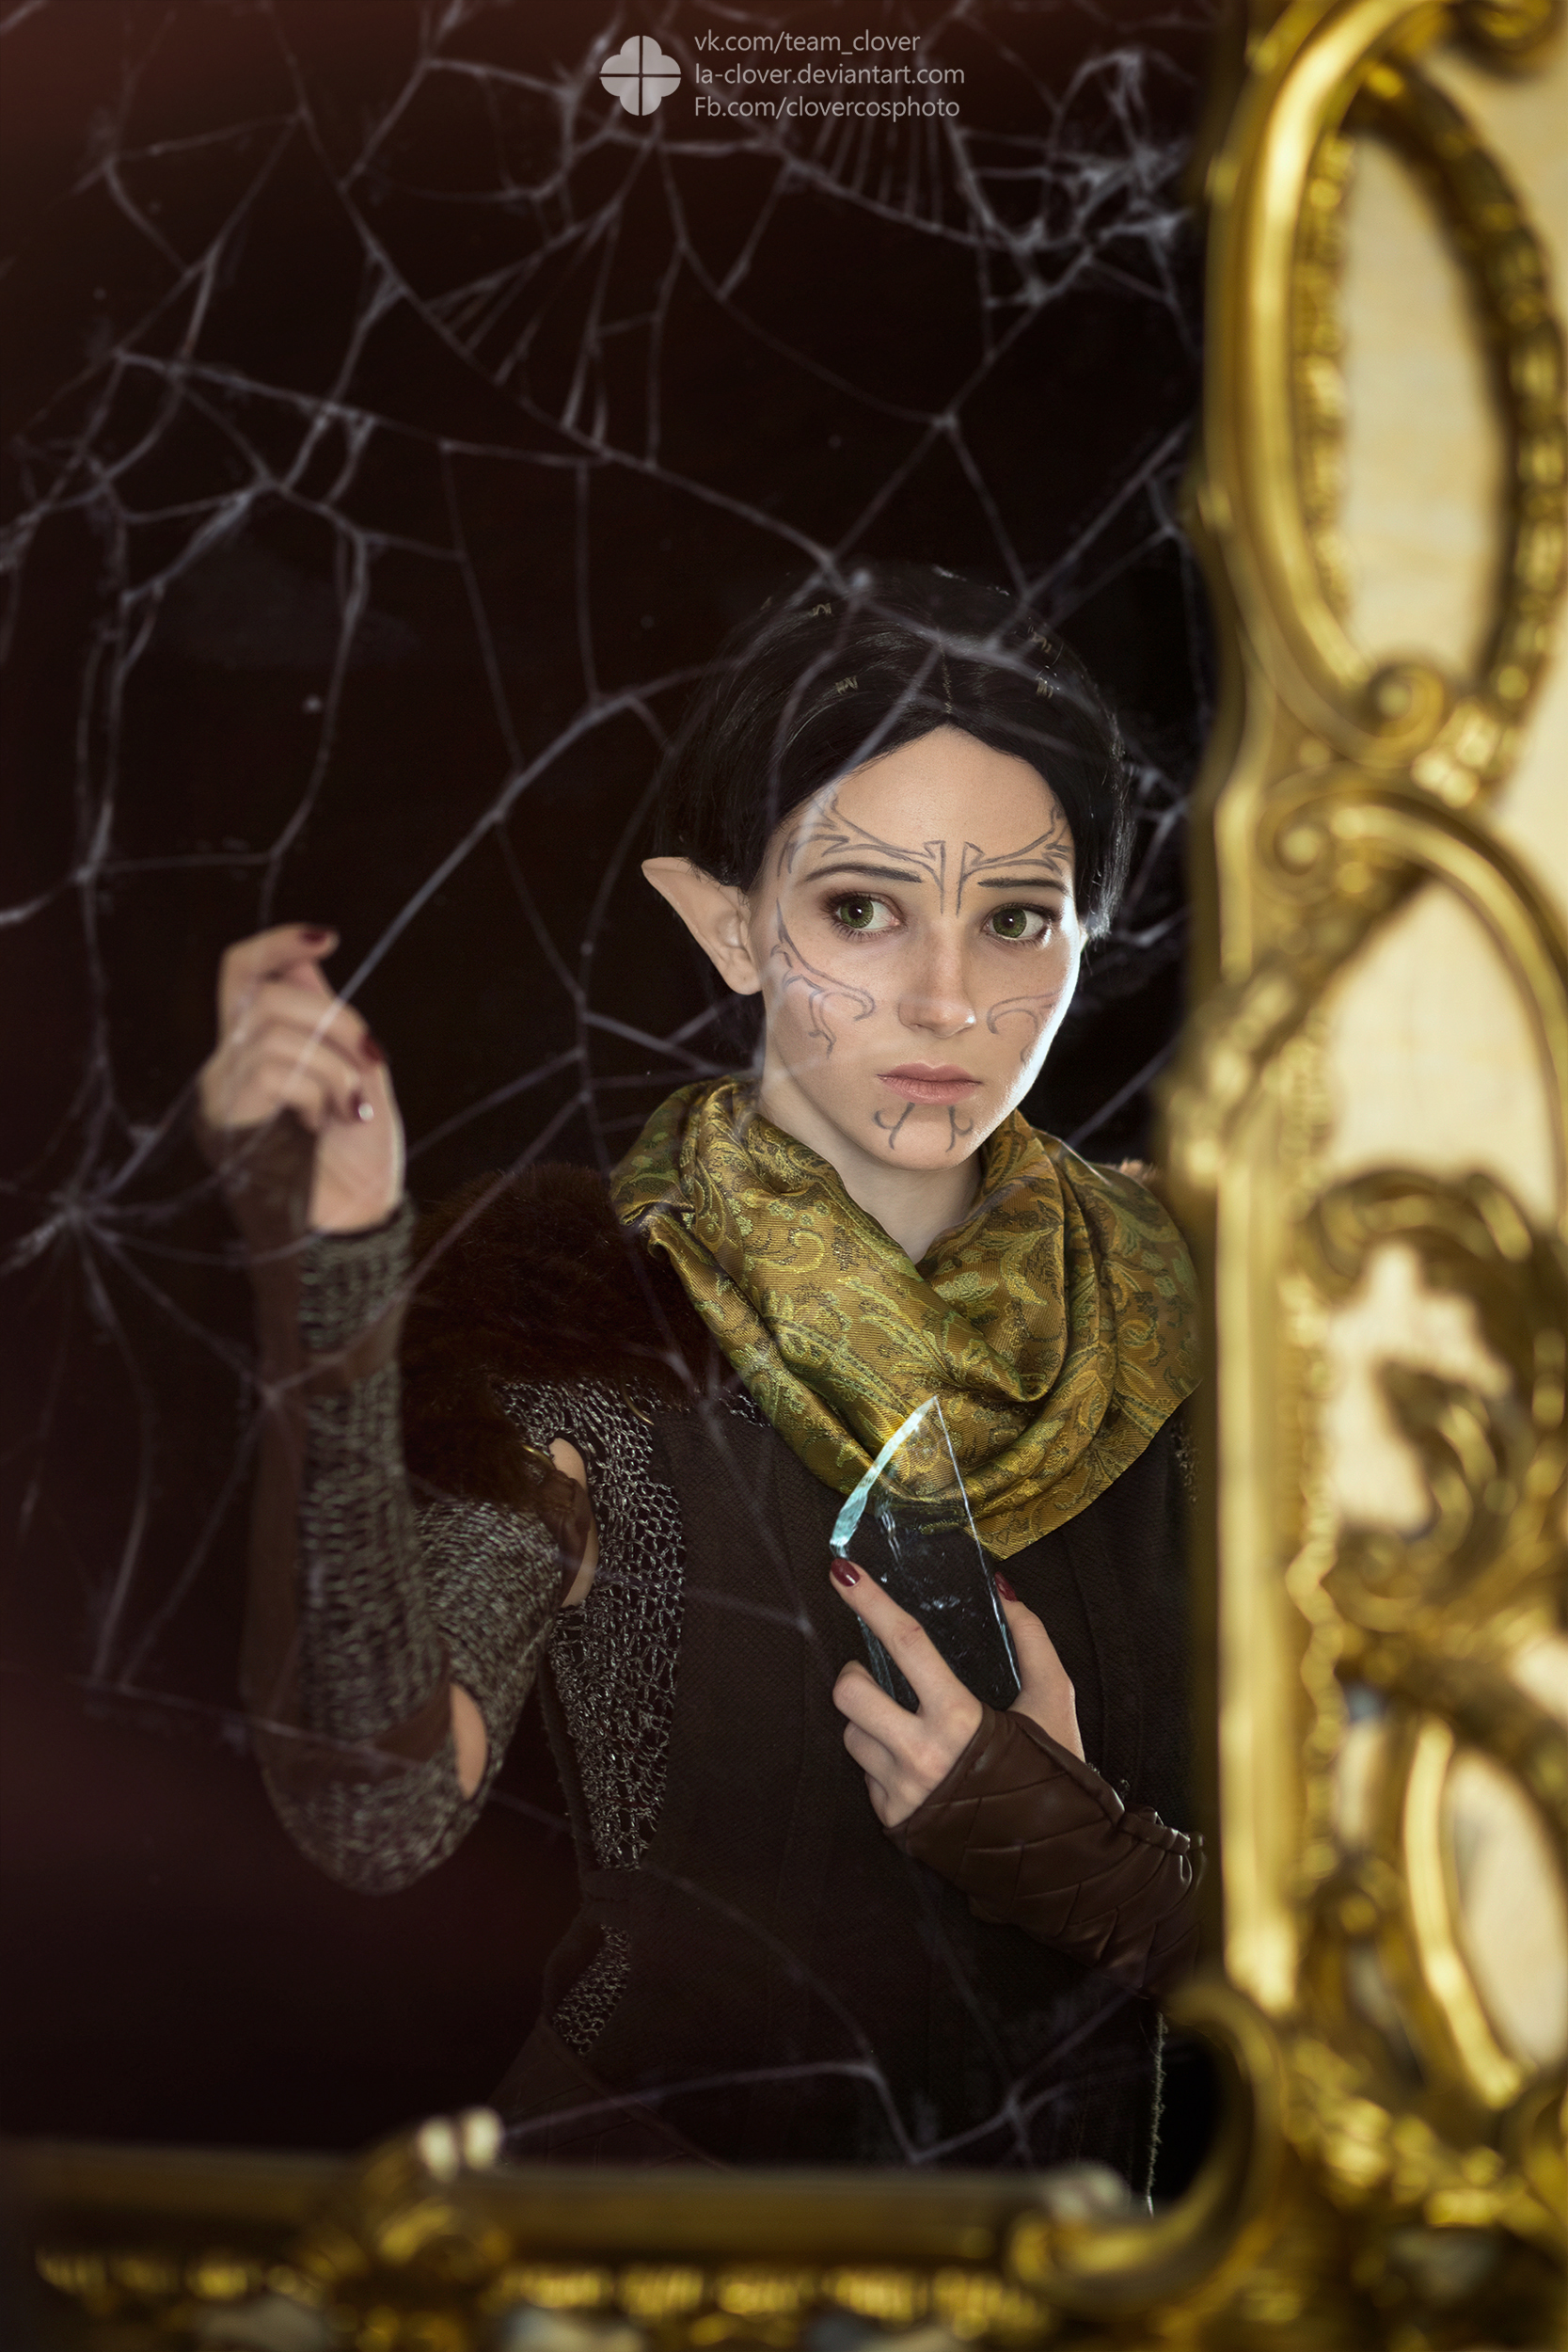 Merrill and the mirror